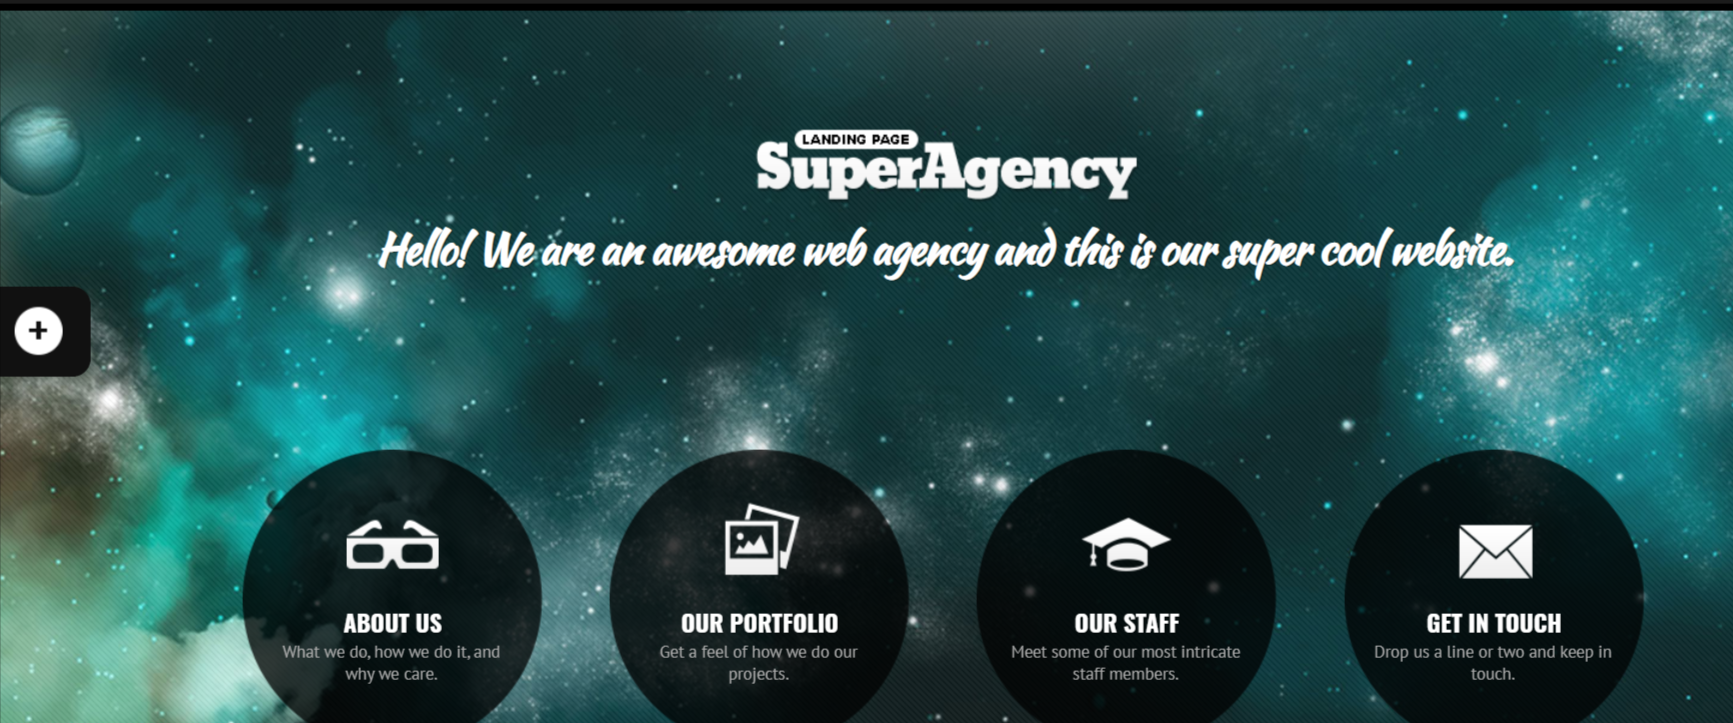 Super-Agency-Responsive-Landing-Page-Preview-ThemeForest.png